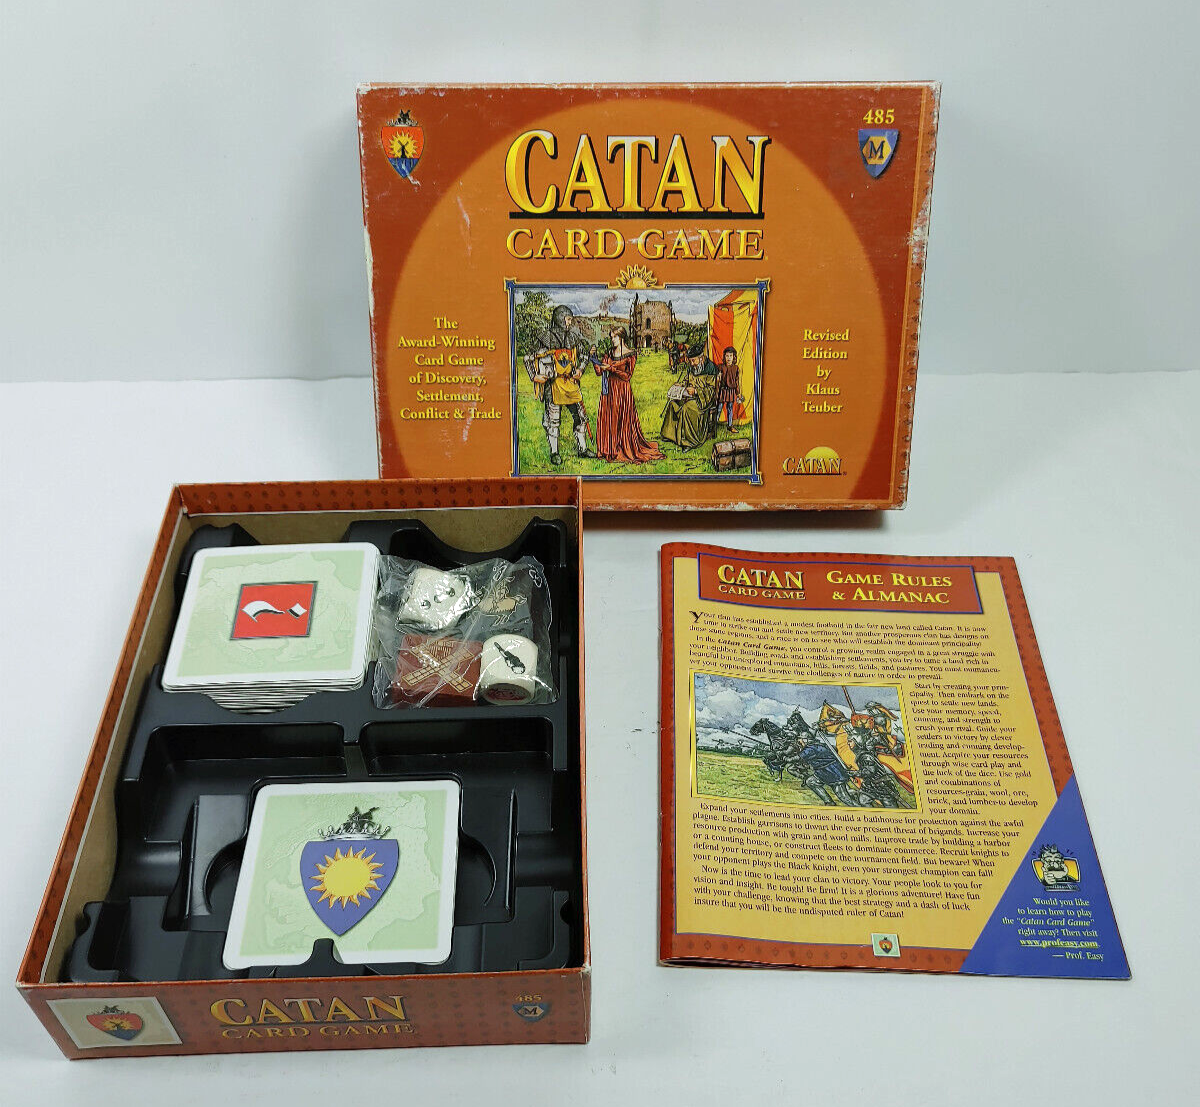 Mayfair Cardgame Catan Card Game Revised Edition Complete CIB - $14.95